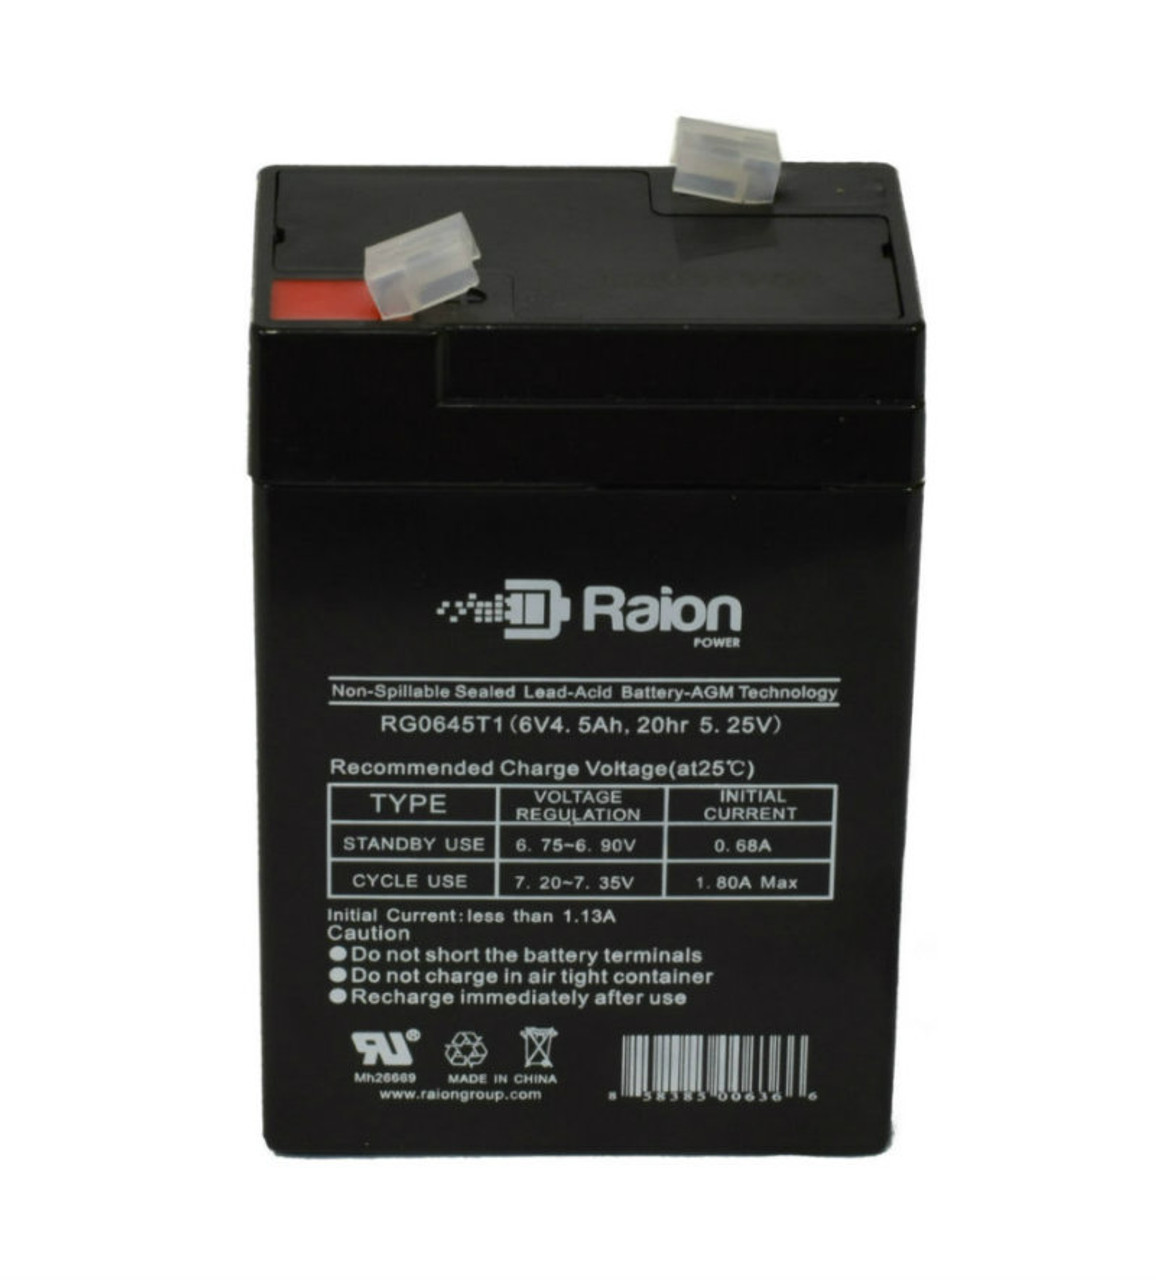 Raion Power RG0645T1 Replacement Battery Cartridge for Light Alarms L1